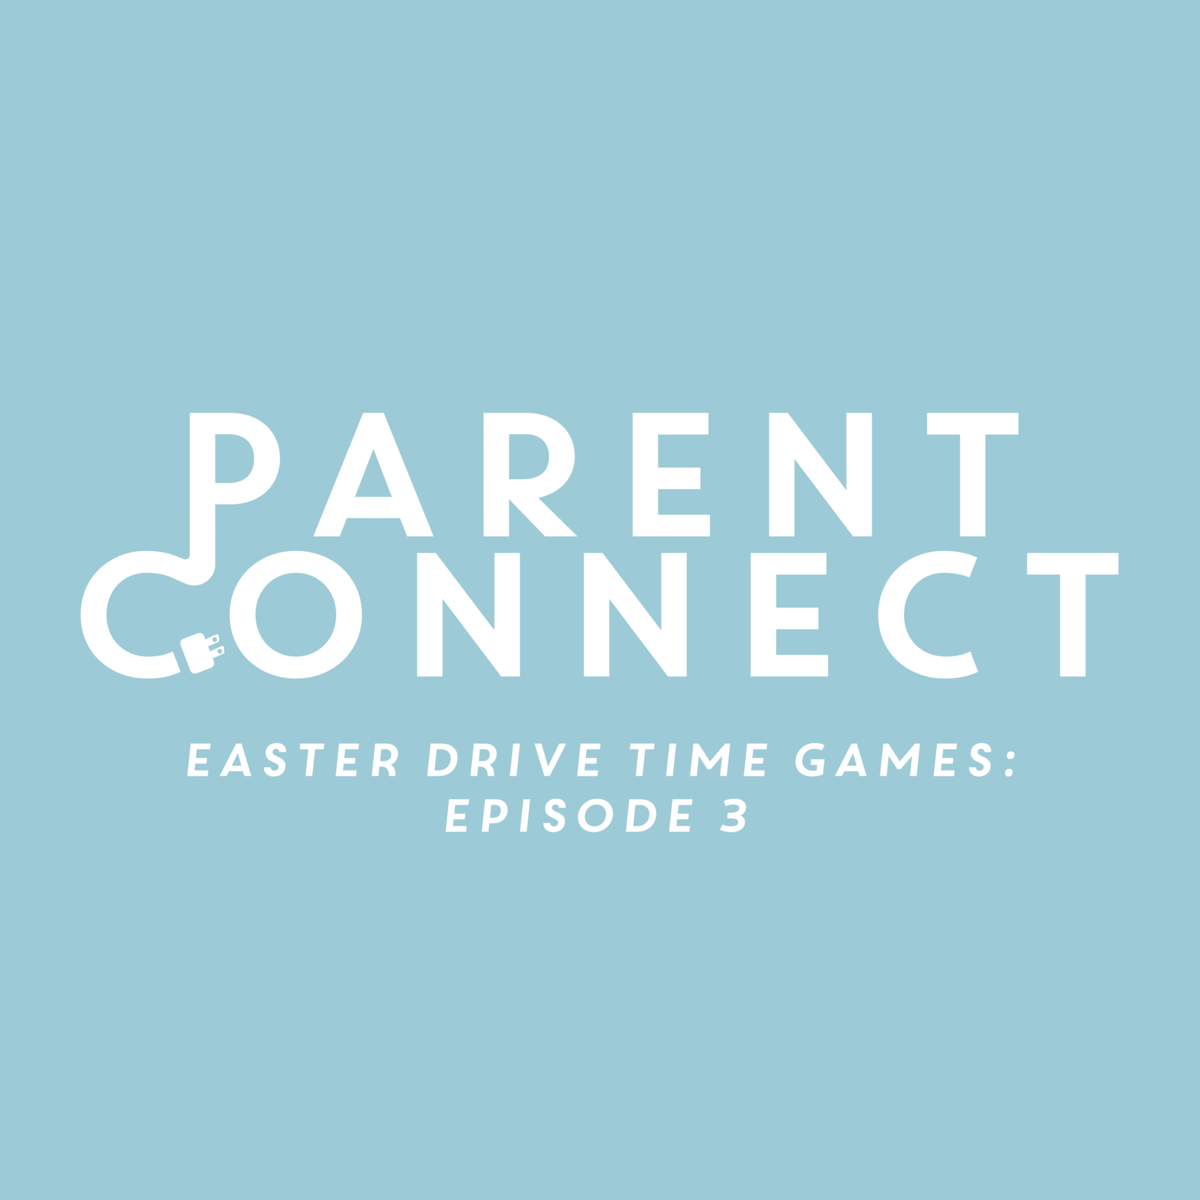 Easter Drive Time Games: Episode 3